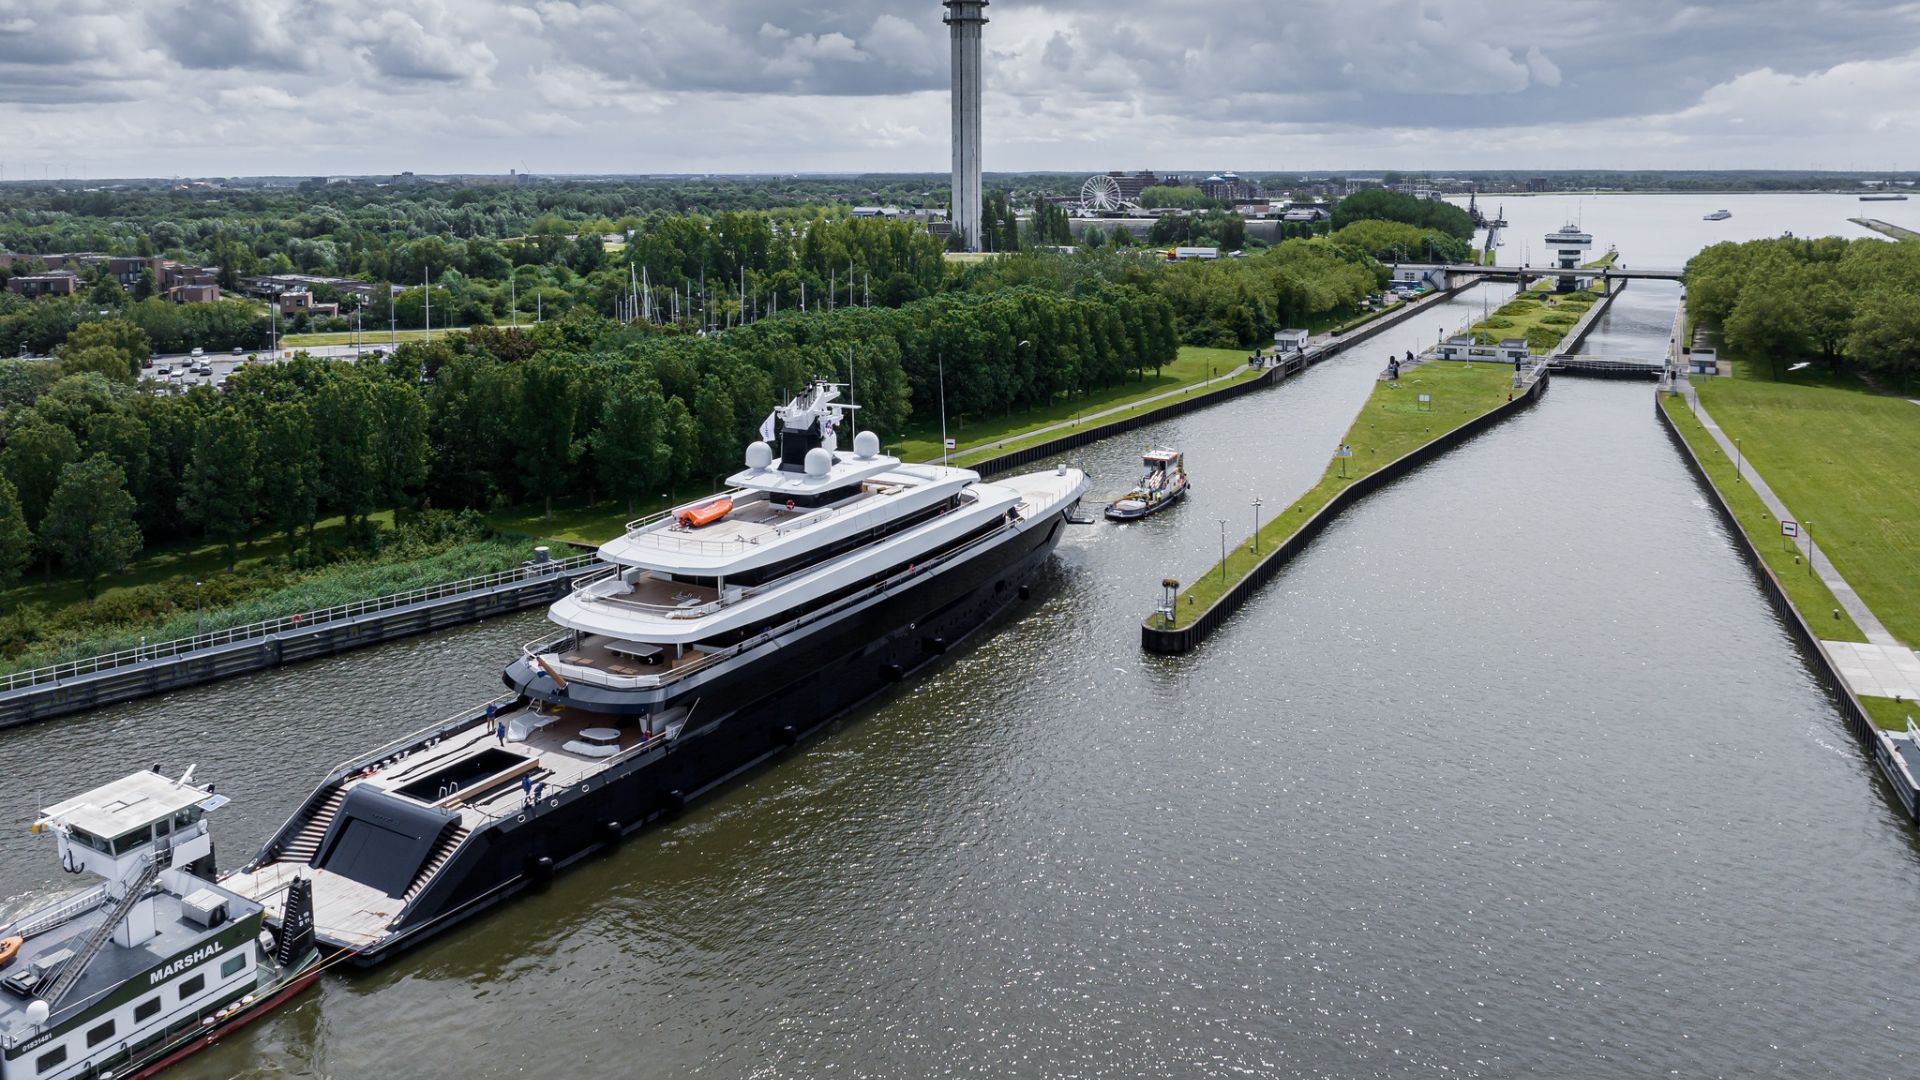 Recently shared images by Feadship have unveiled the magnificent Drizzle, a 301-foot marvel believed to belong to Zara billionaire Amancio Ortega. Departing from Feadship’s shipyard in Amsterdam on June 13, this opulent pleasure craft is valued at a staggering $111 million. The yacht succeeds a smaller 220-foot Feadship vessel of the same name previously owned by Ortega, confirming his ownership of this new flagship. The smaller Drizzle was listed for sale at $69.5 million through Jonathan Syrett of Hamilton Marine International.